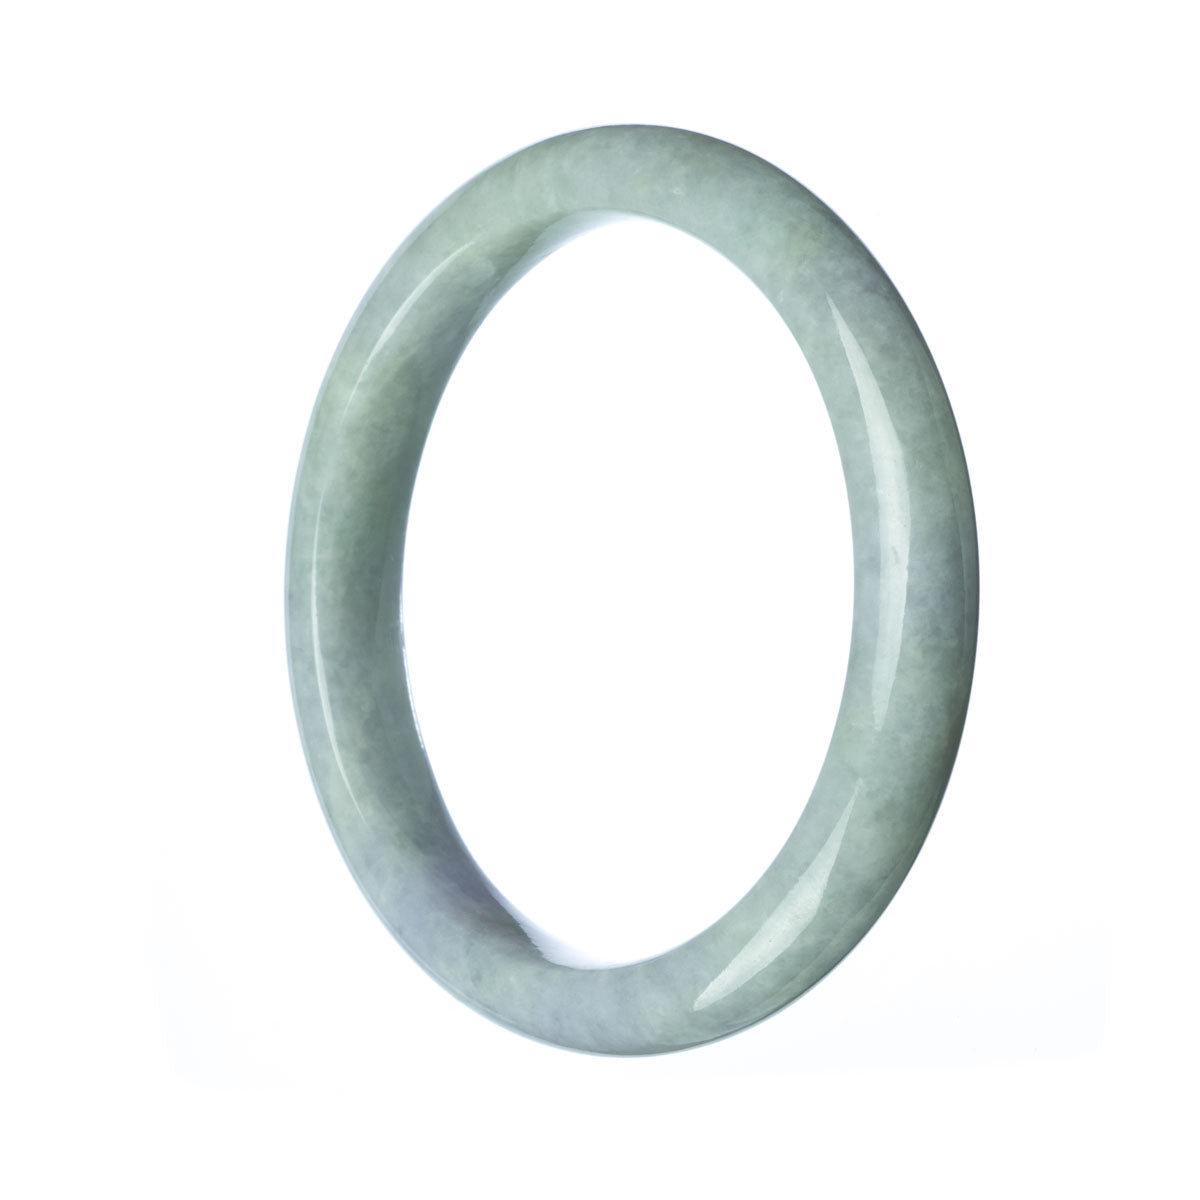 A close-up photo of a white jade bangle with a lavender hue. The bangle is semi-round in shape and has a smooth, polished surface. The vibrant lavender color adds a touch of elegance to this natural stone accessory.